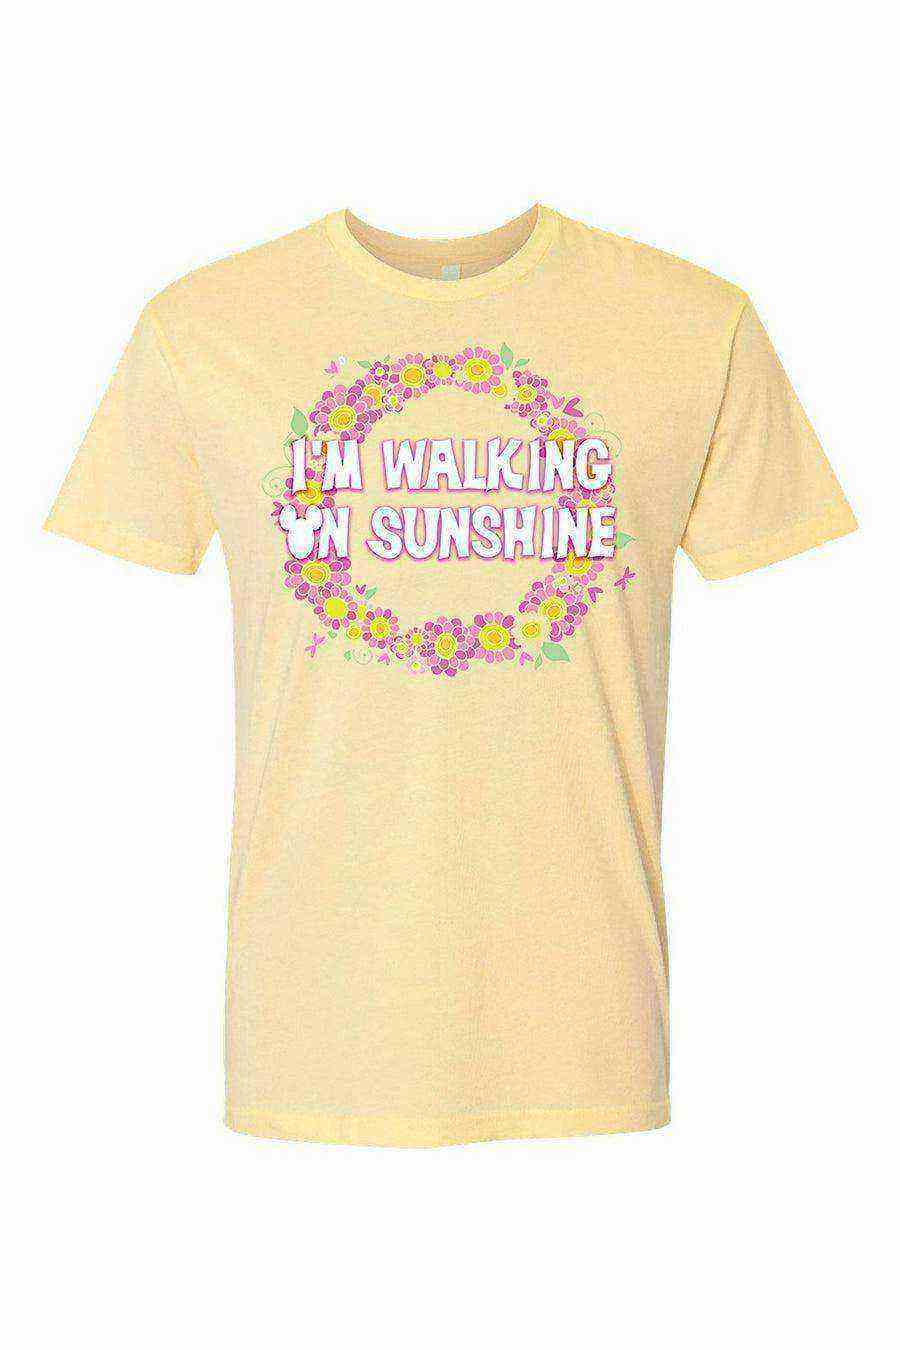 Youth | Im Walking On Sunshine Shirt | Epcot Flower and Garden Shirt - Dylan's Tees